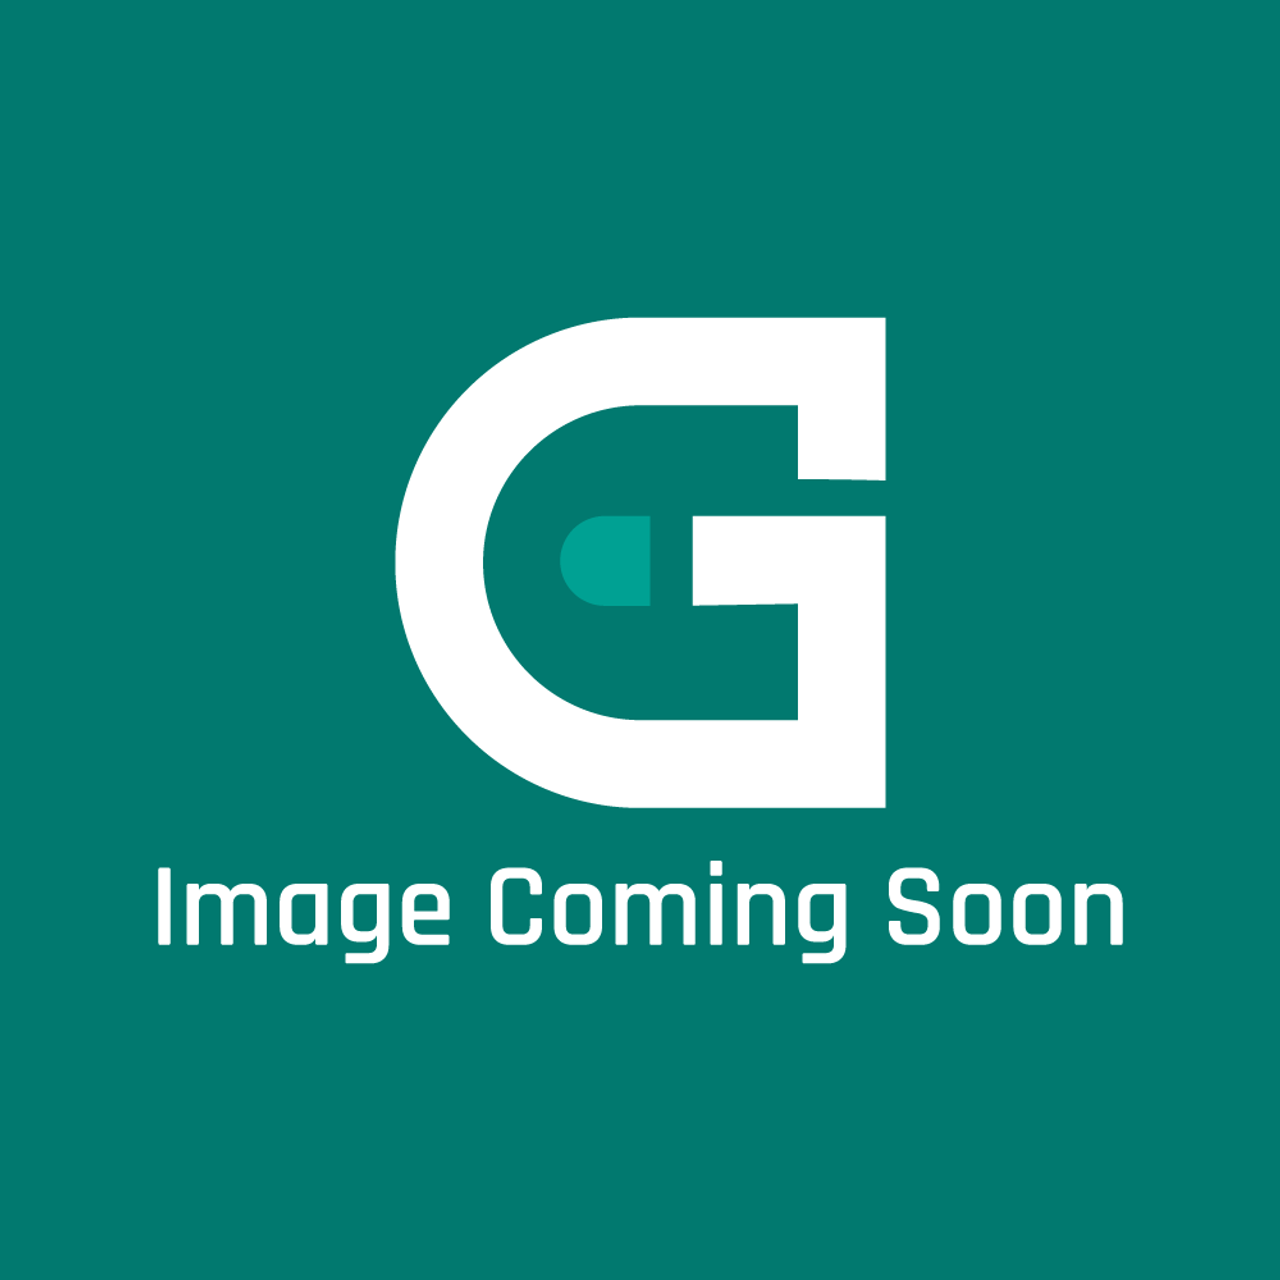 AGA Marvel 42244840 - S/A-41008222 Comp/42101240 Drier - Image Coming Soon!